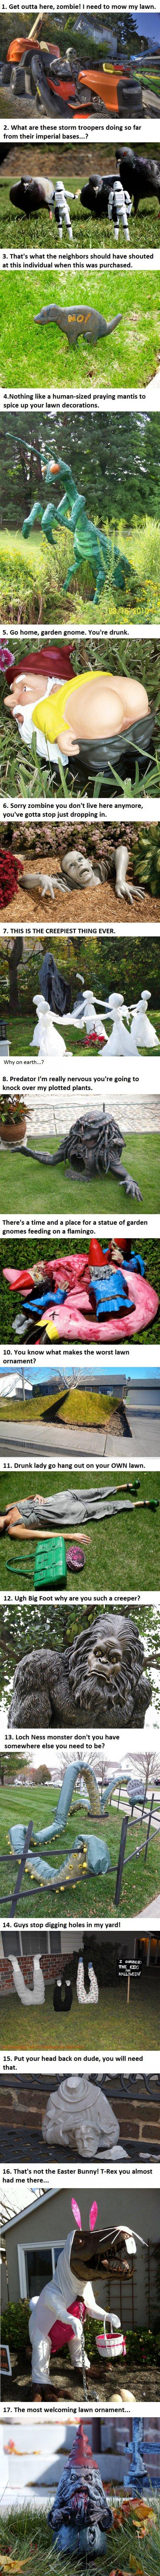 17 People With Terrible Tastes In Yard Decorations. #5 Should Be Evicted! -   Misc